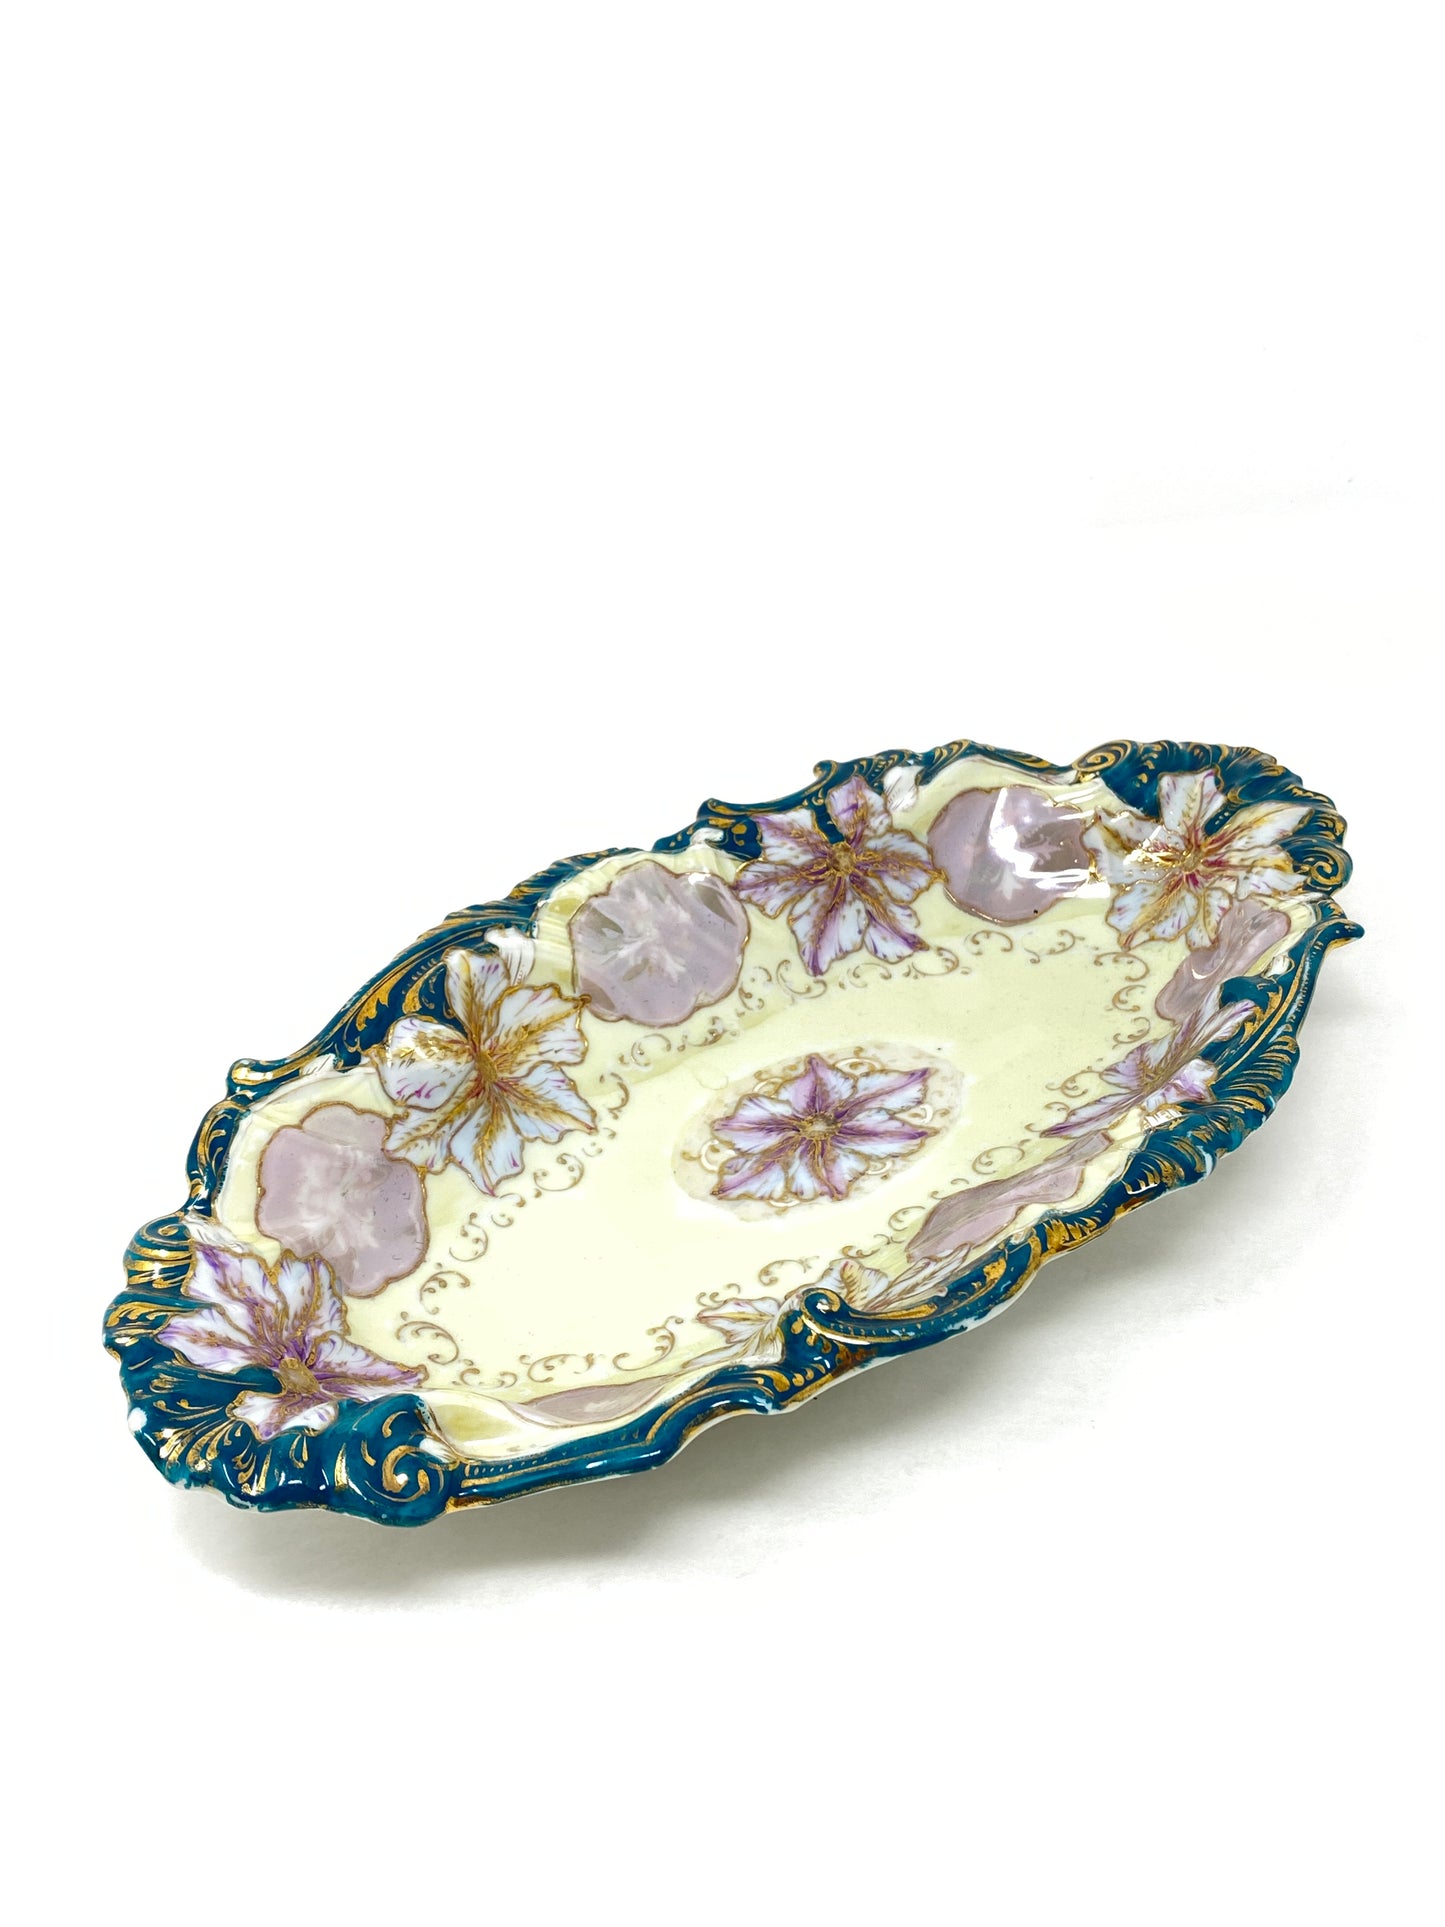 R.S. Prussia Porcelain Hand Painted Teal & Yellow Celery Dish